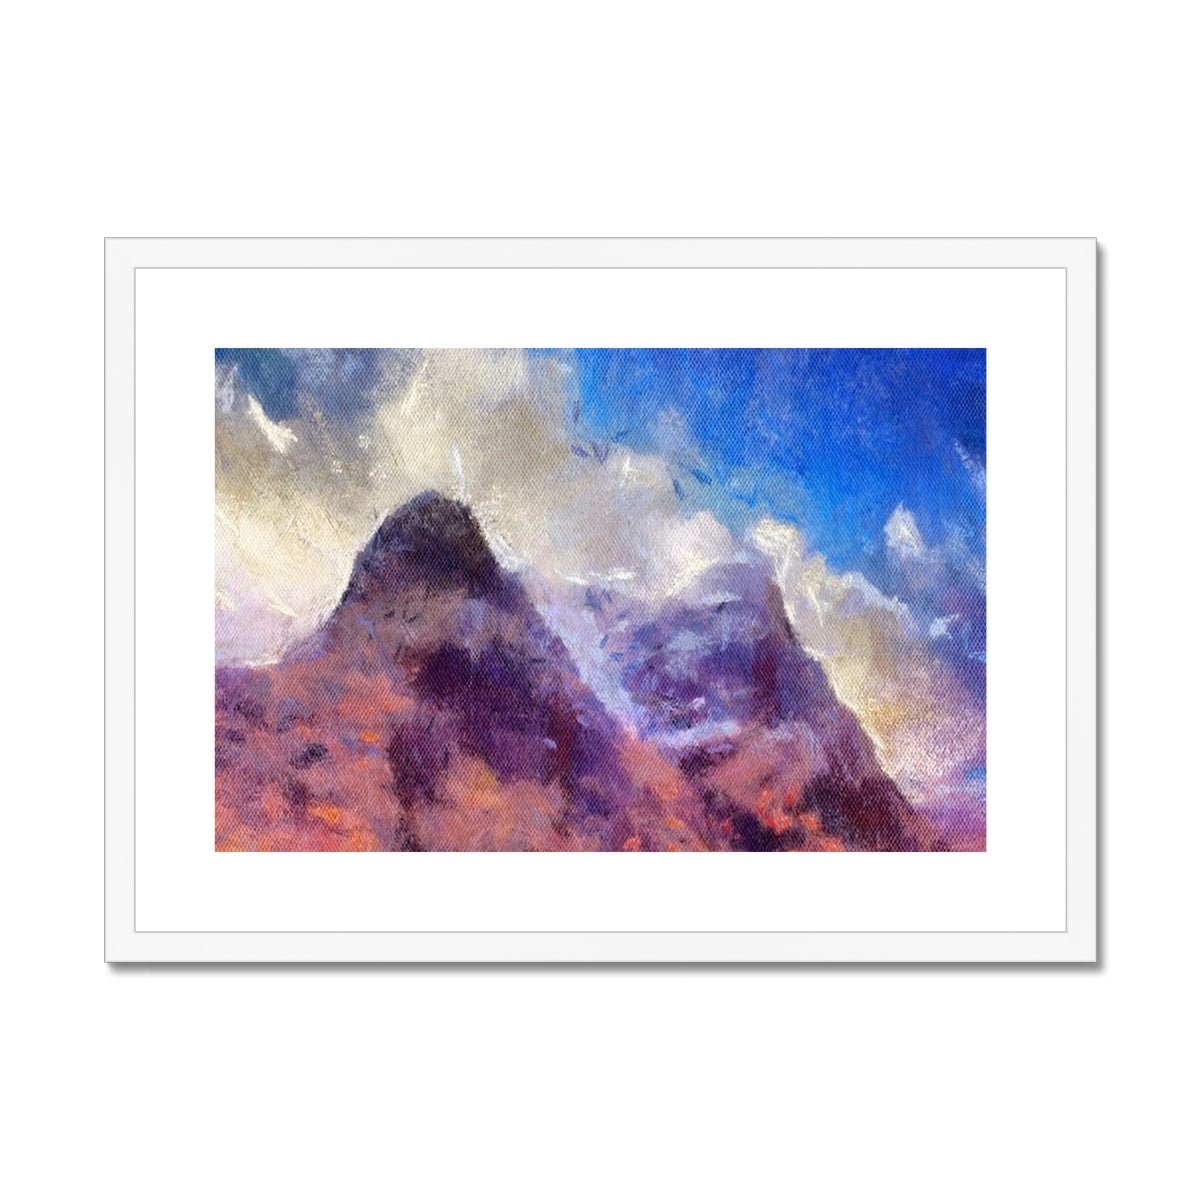 Glencoe Painting | Framed & Mounted Prints From Scotland-Framed & Mounted Prints-Glencoe Art Gallery-A2 Landscape-White Frame-Paintings, Prints, Homeware, Art Gifts From Scotland By Scottish Artist Kevin Hunter